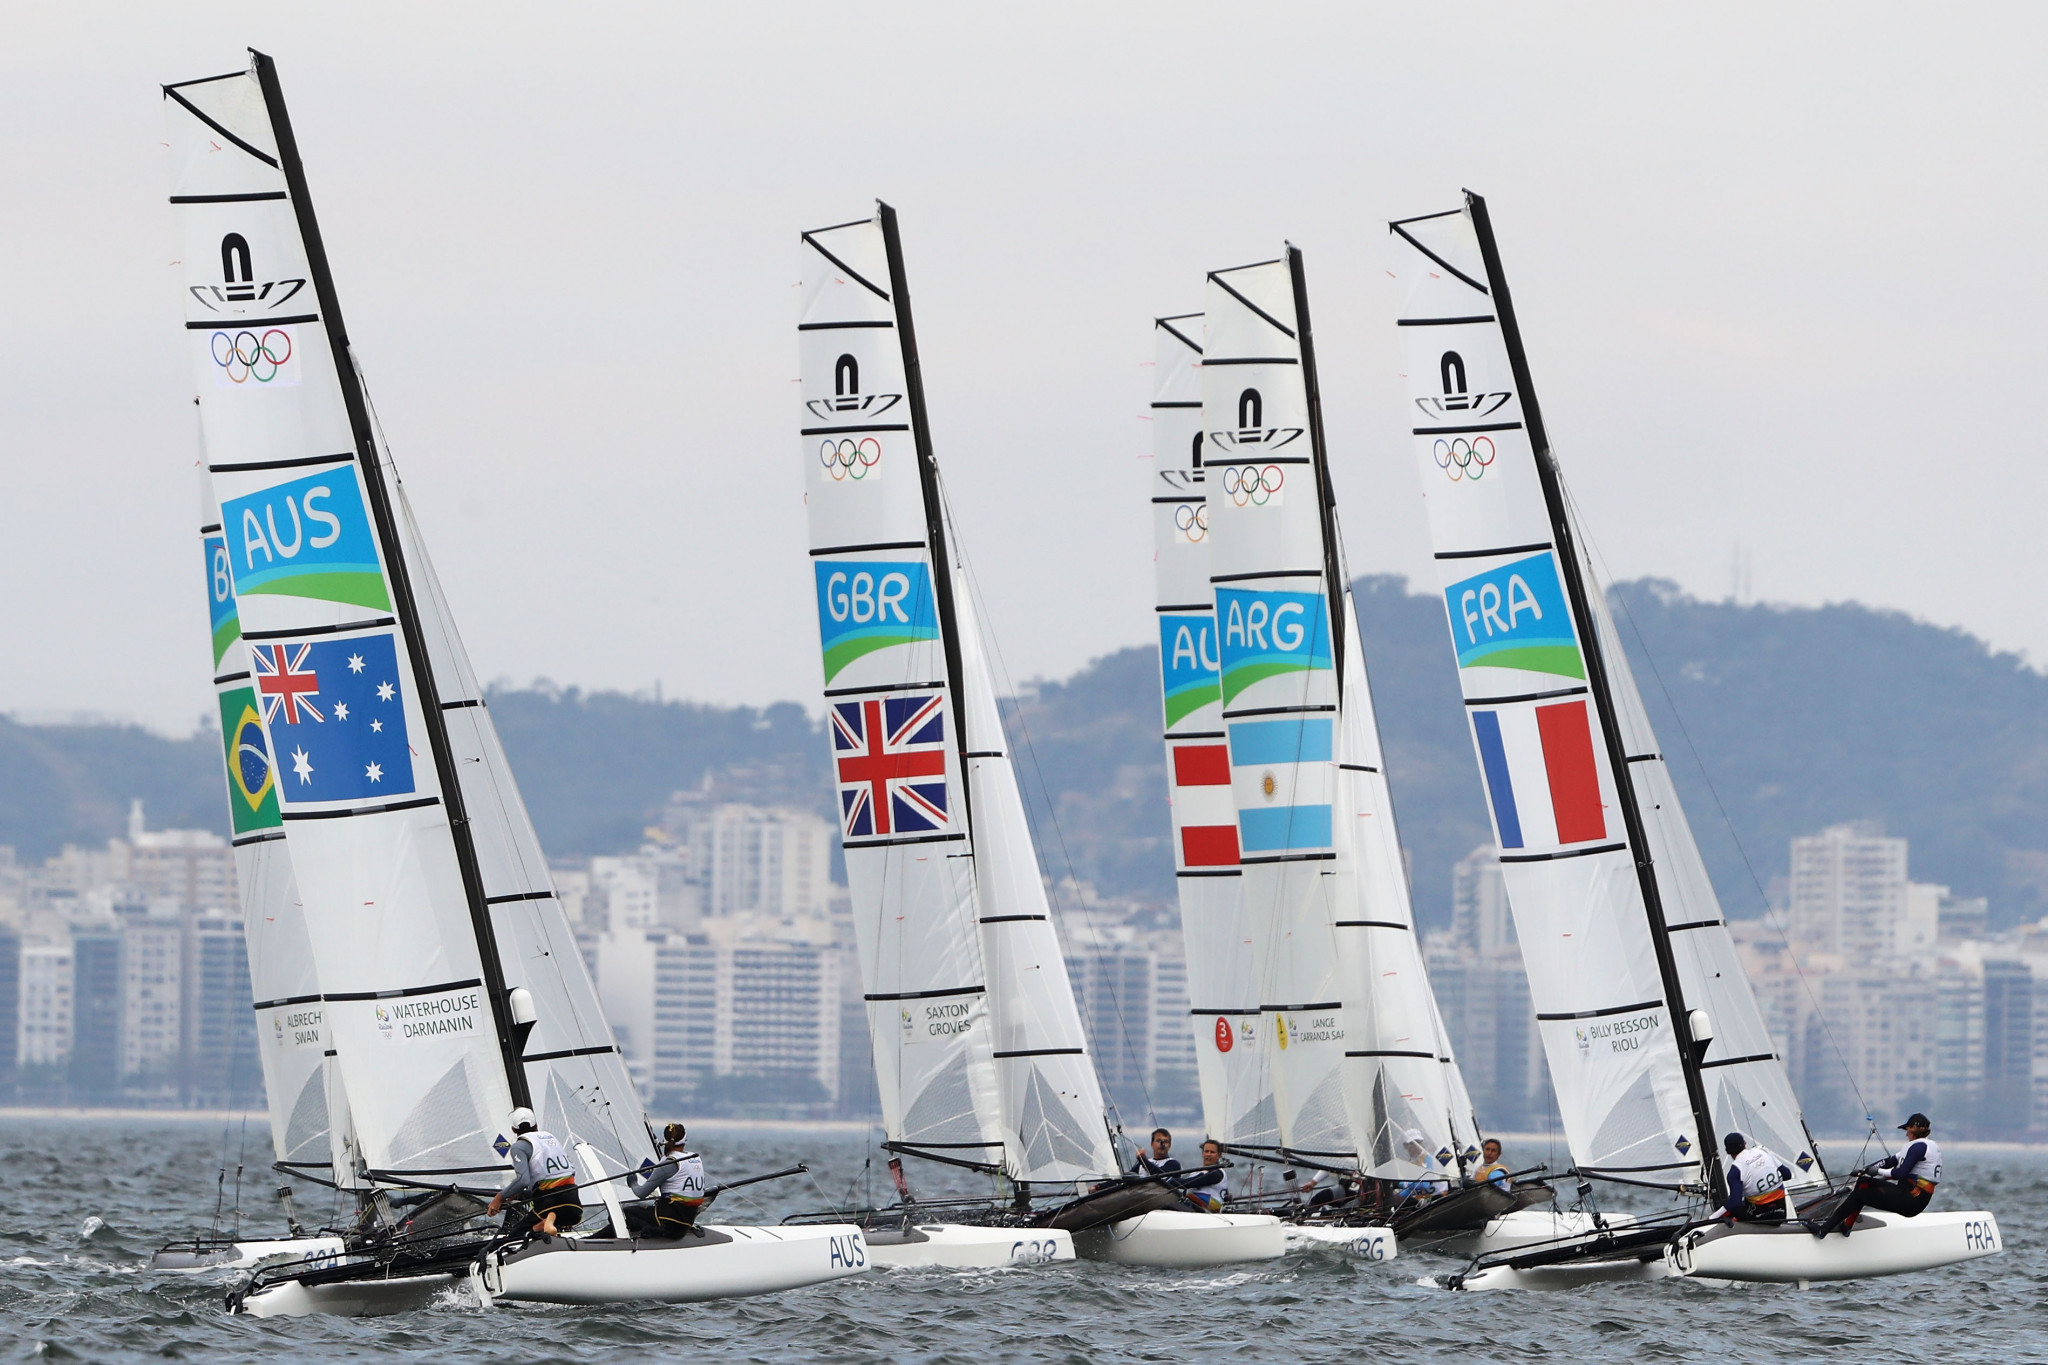 Nacra 17 has reportedly been renewed for Paris 2024 ©Getty Images